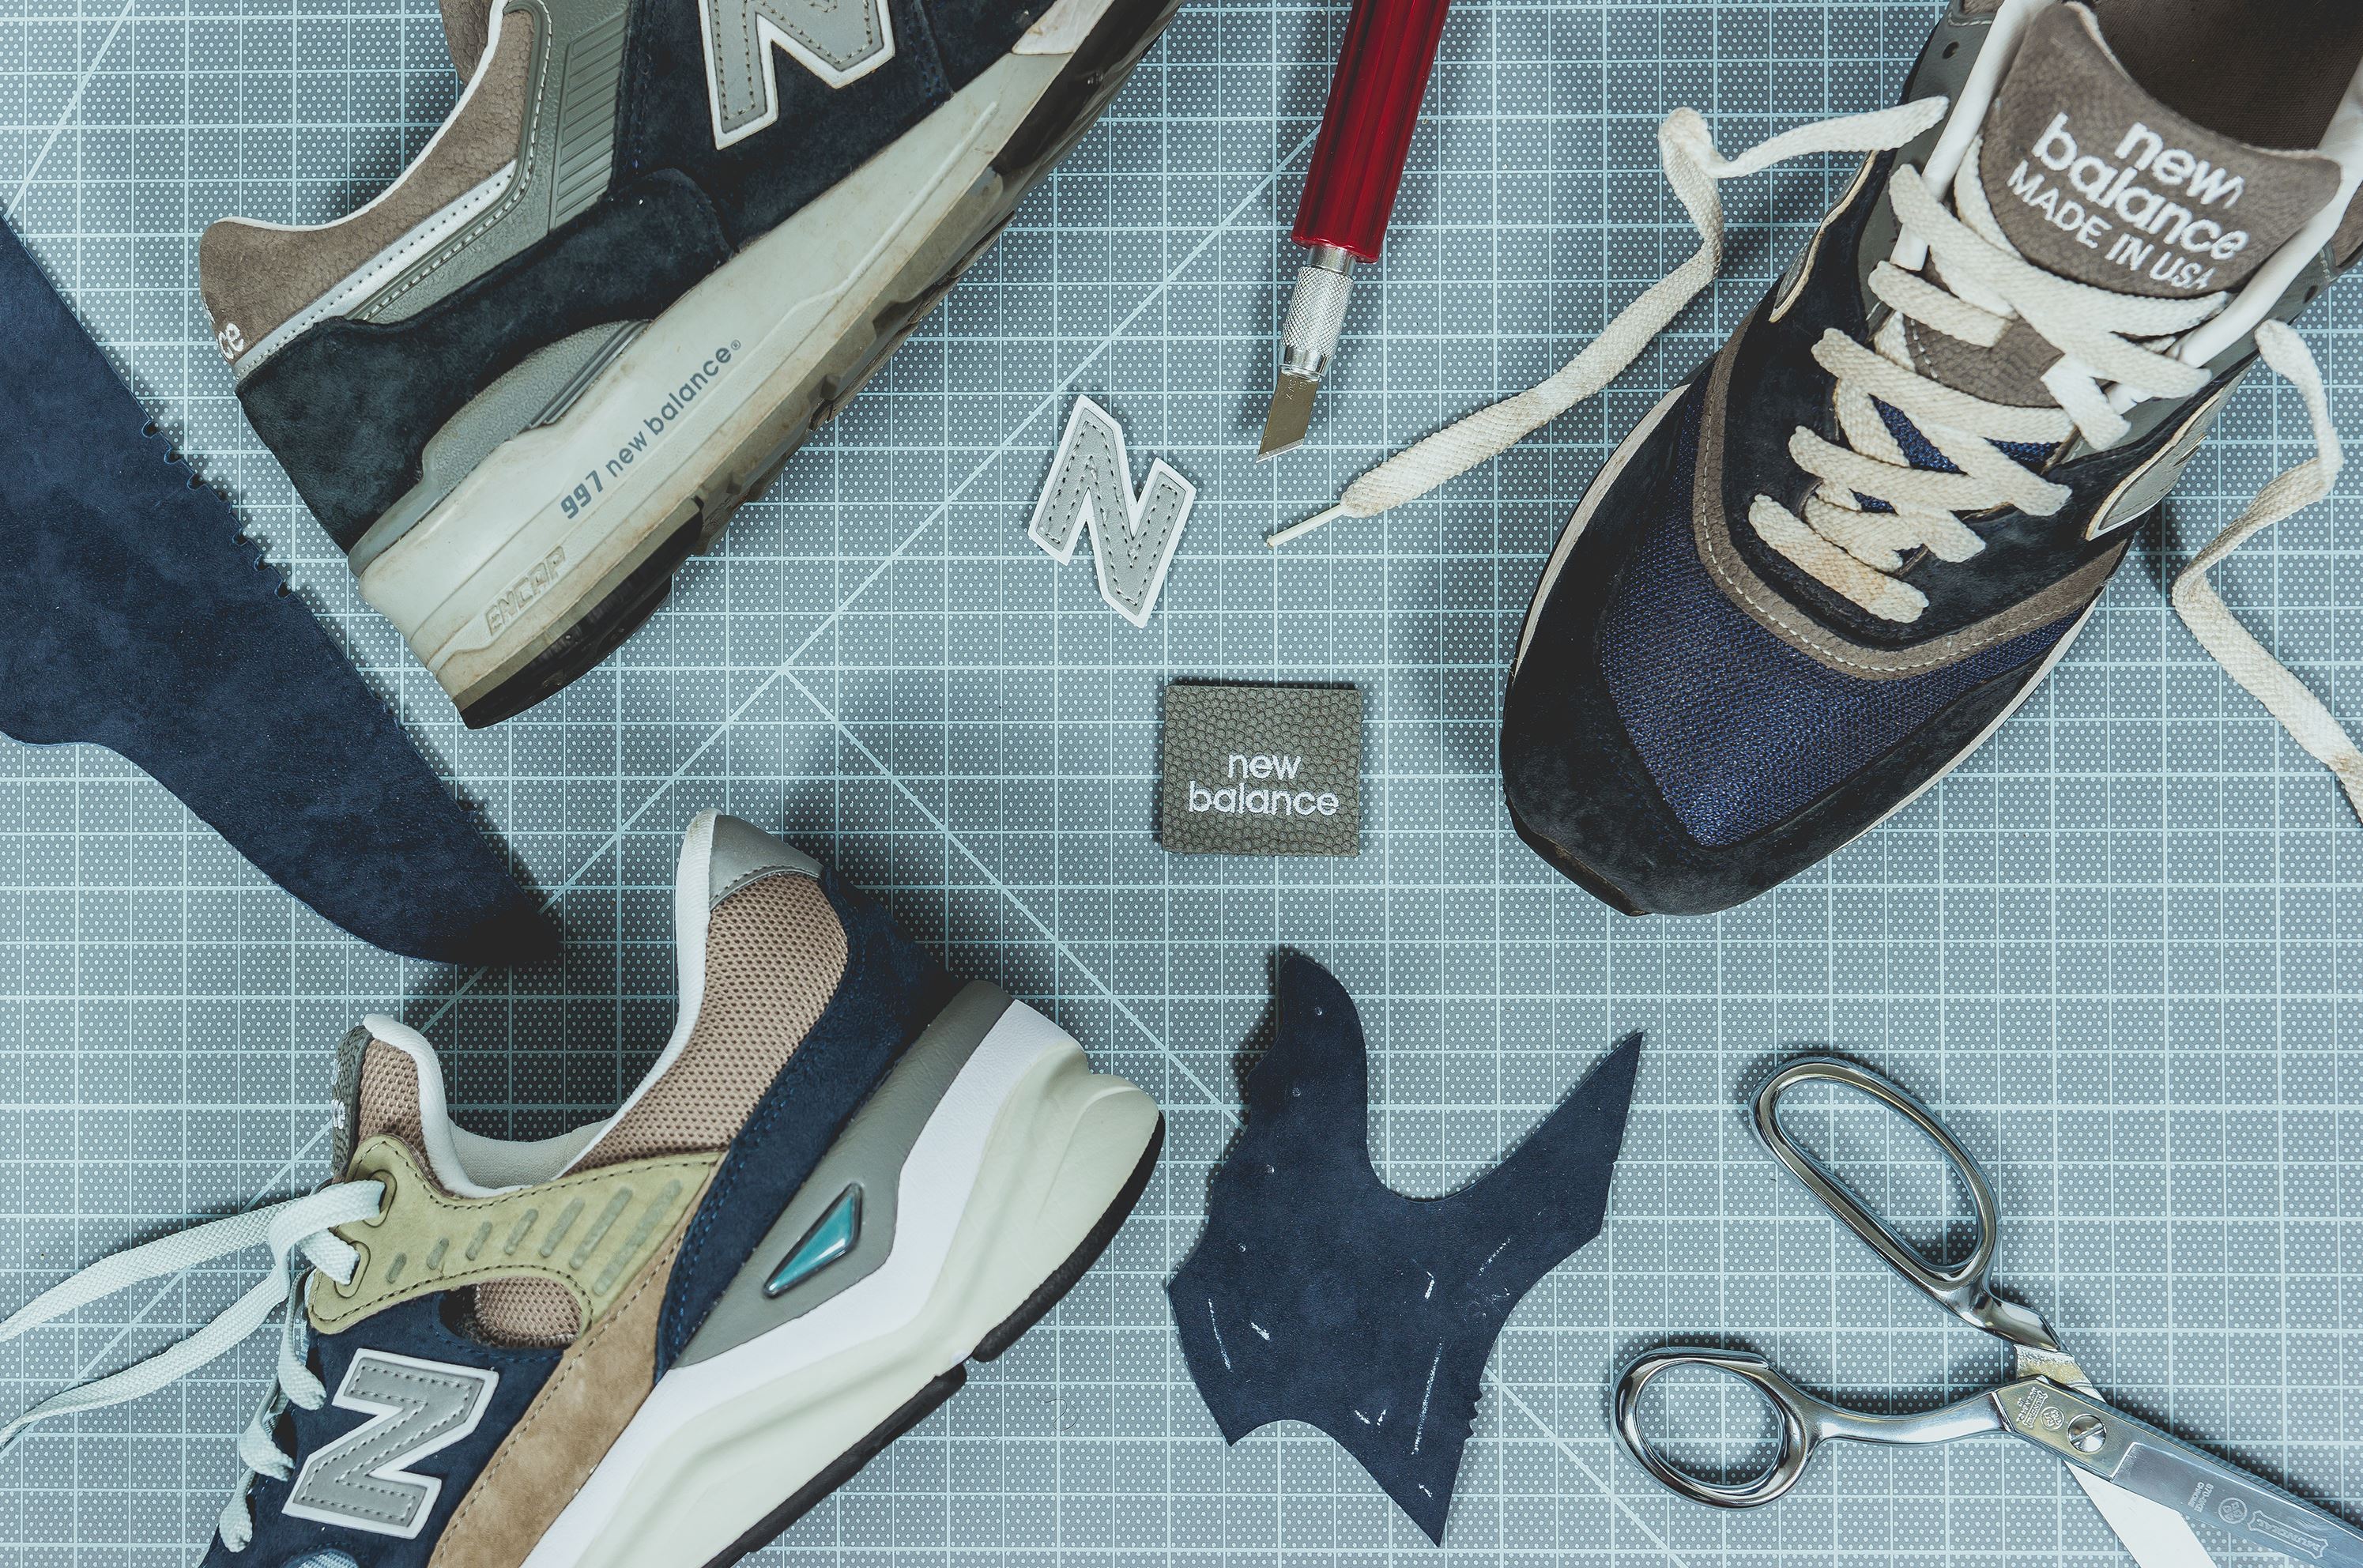 packer new balance X90 recon infinity edition release date